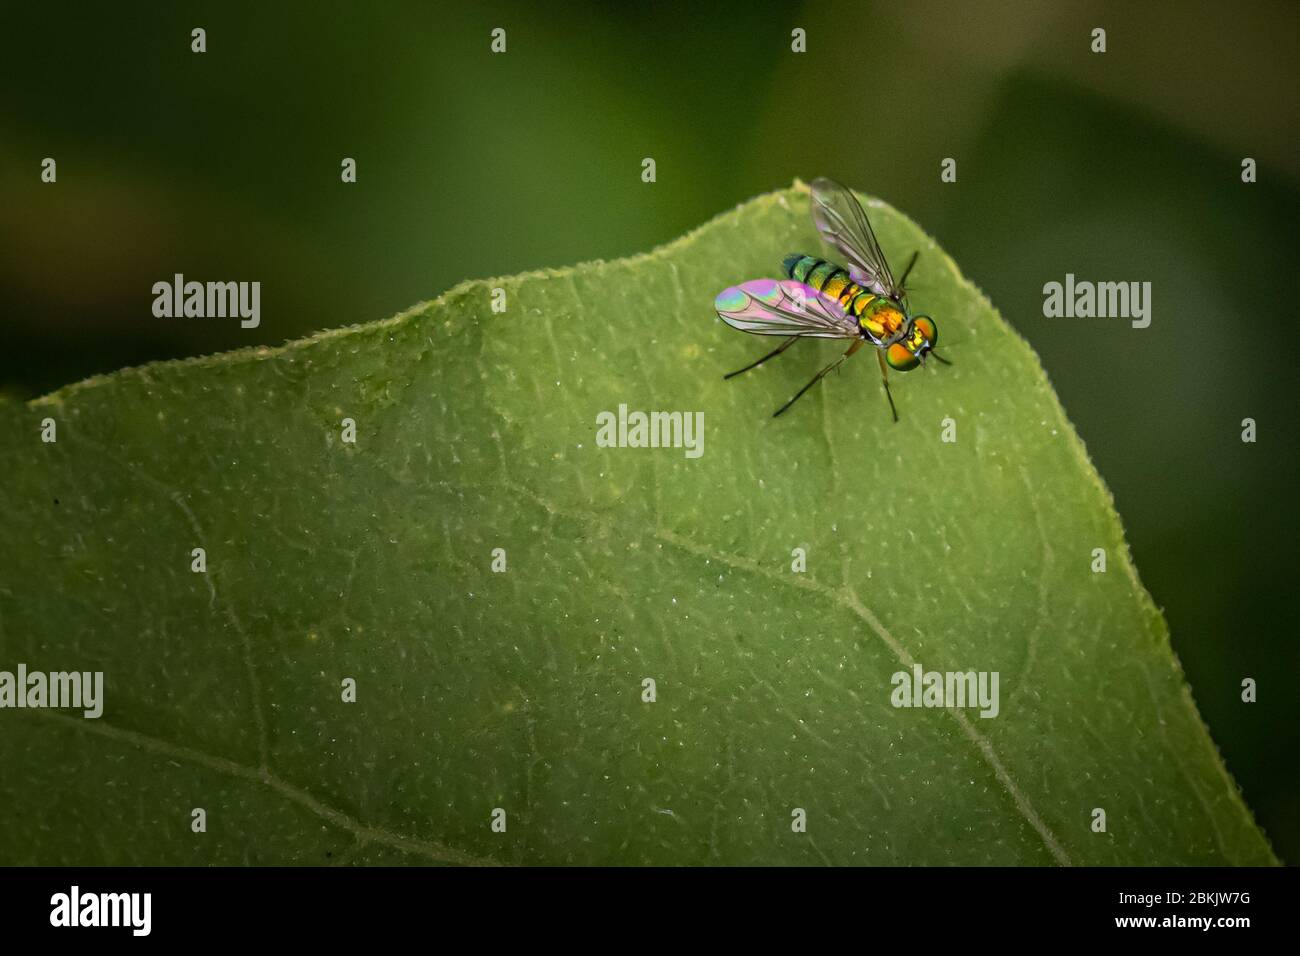 A long legged fly perches on a leaf in front of a dark blurred background Stock Photo